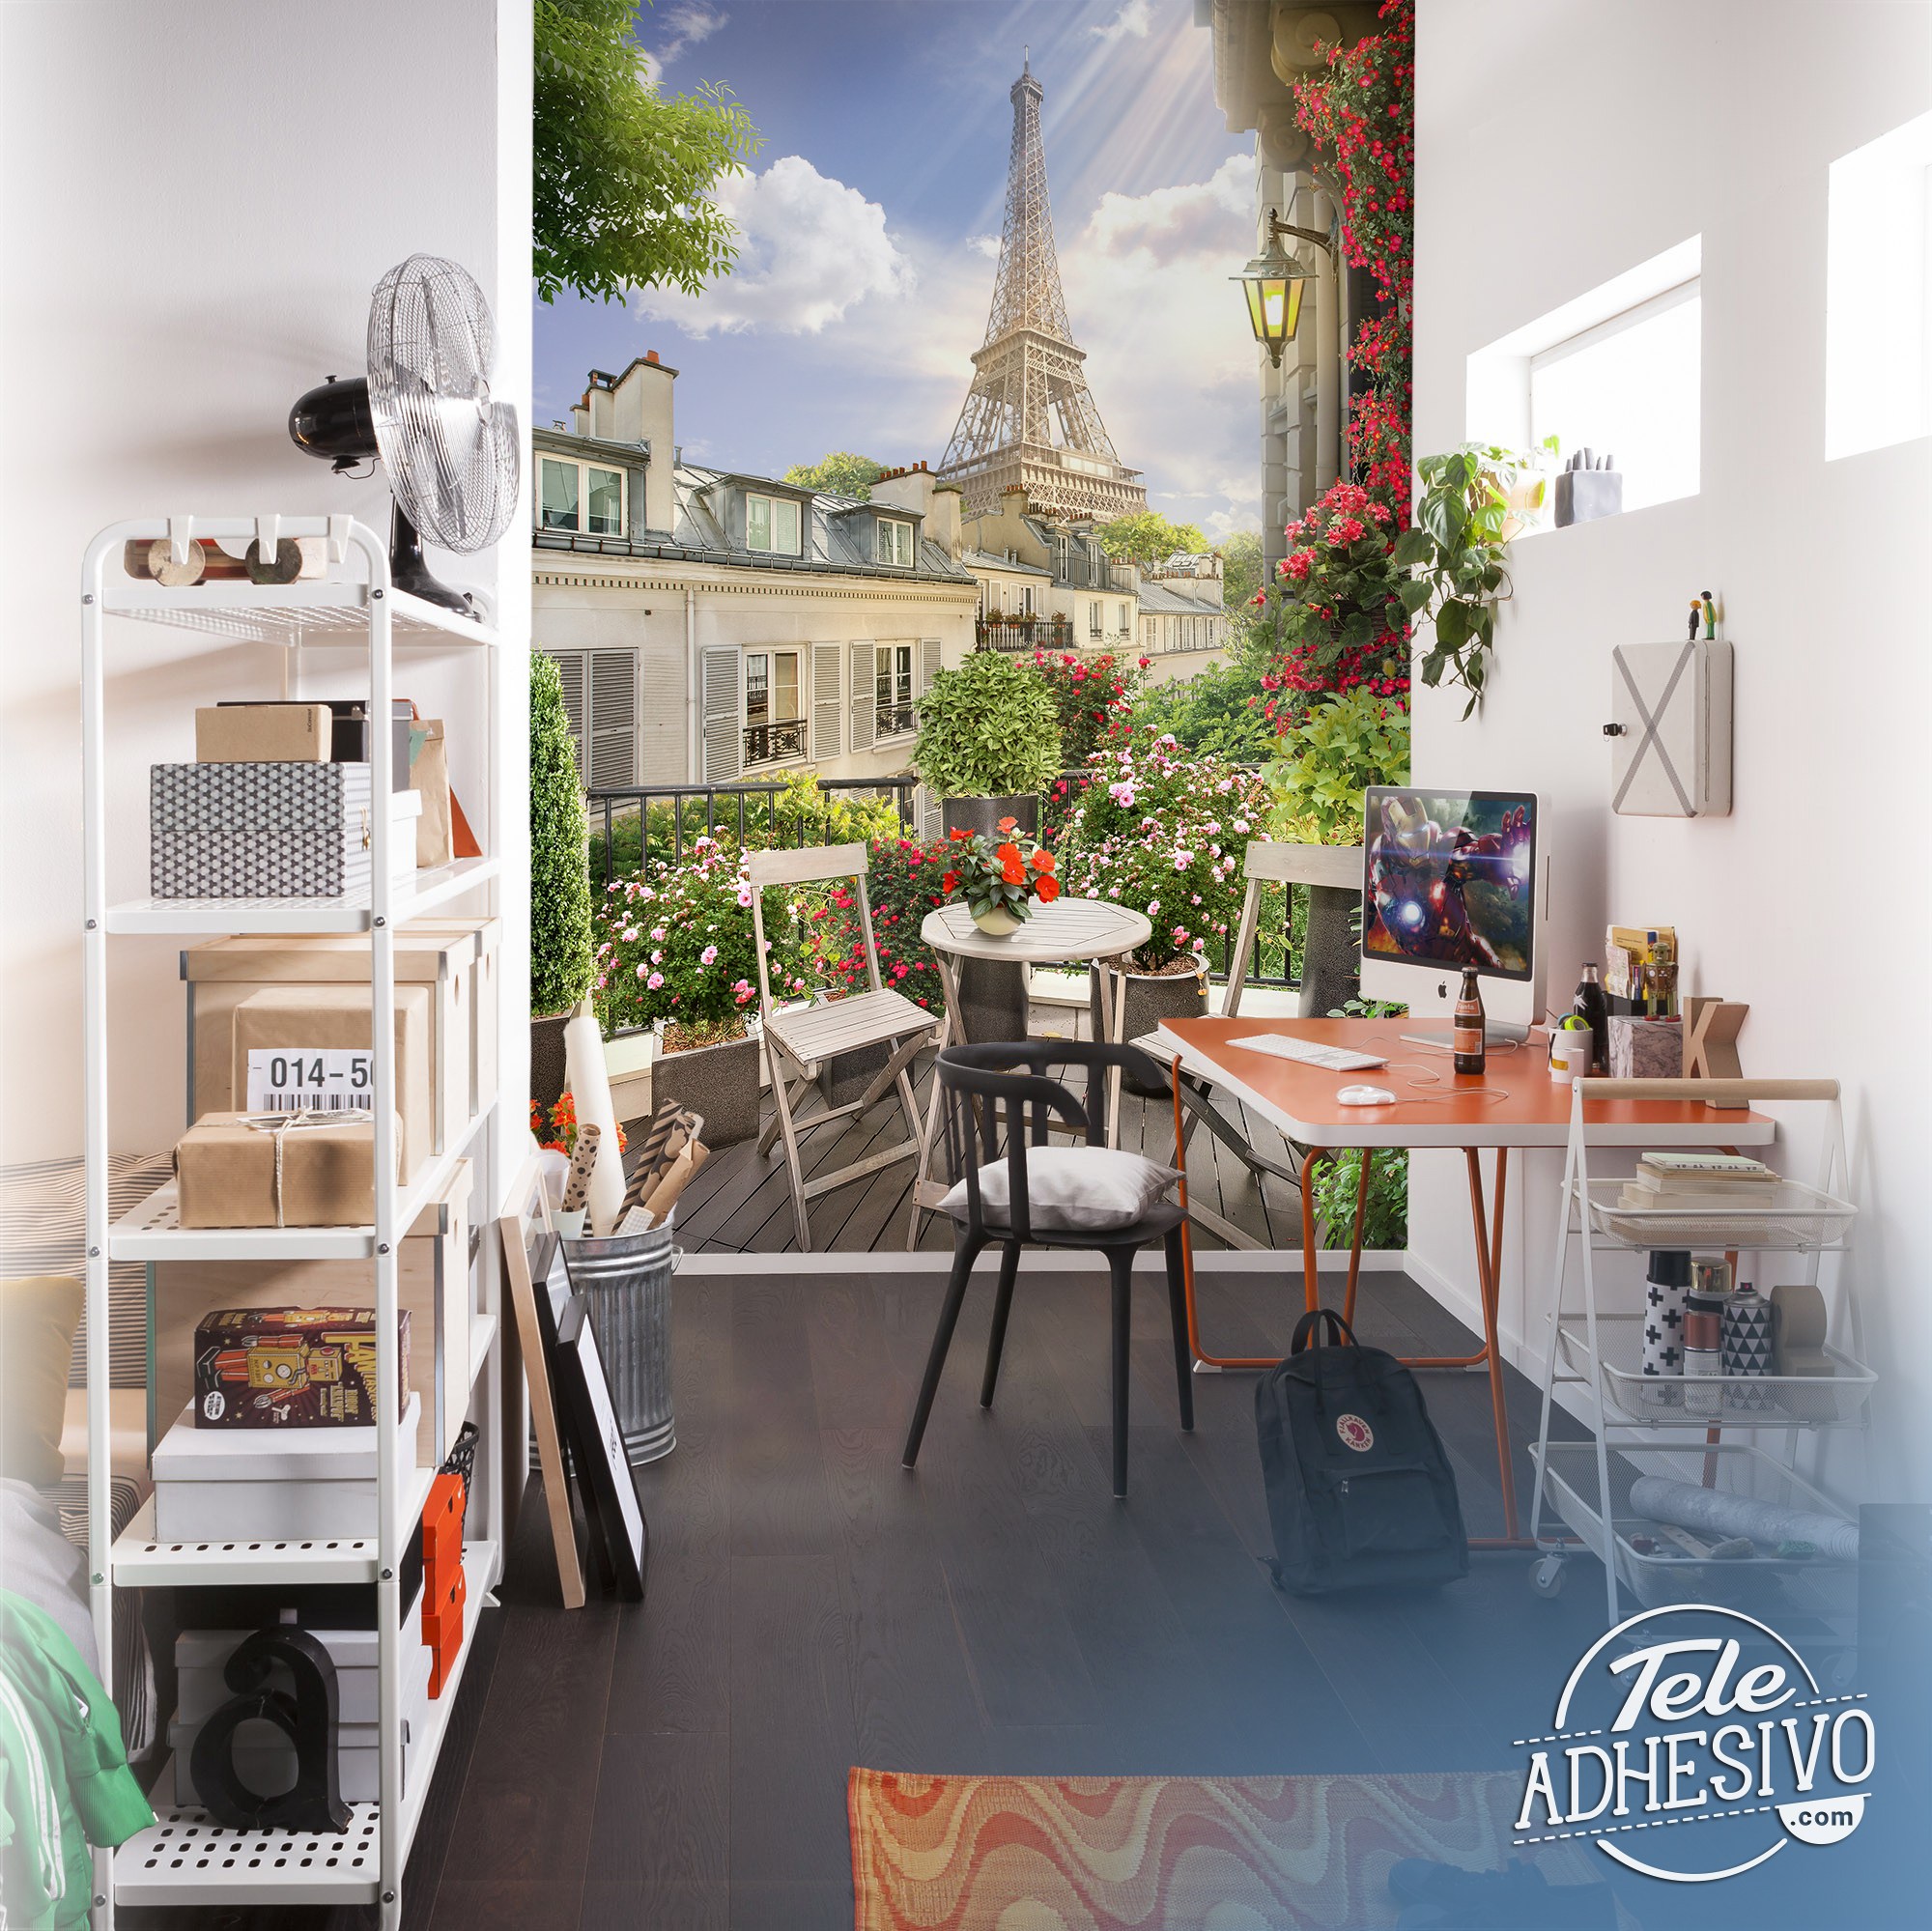 Wall Murals: Terrace in front of the Eiffel tower